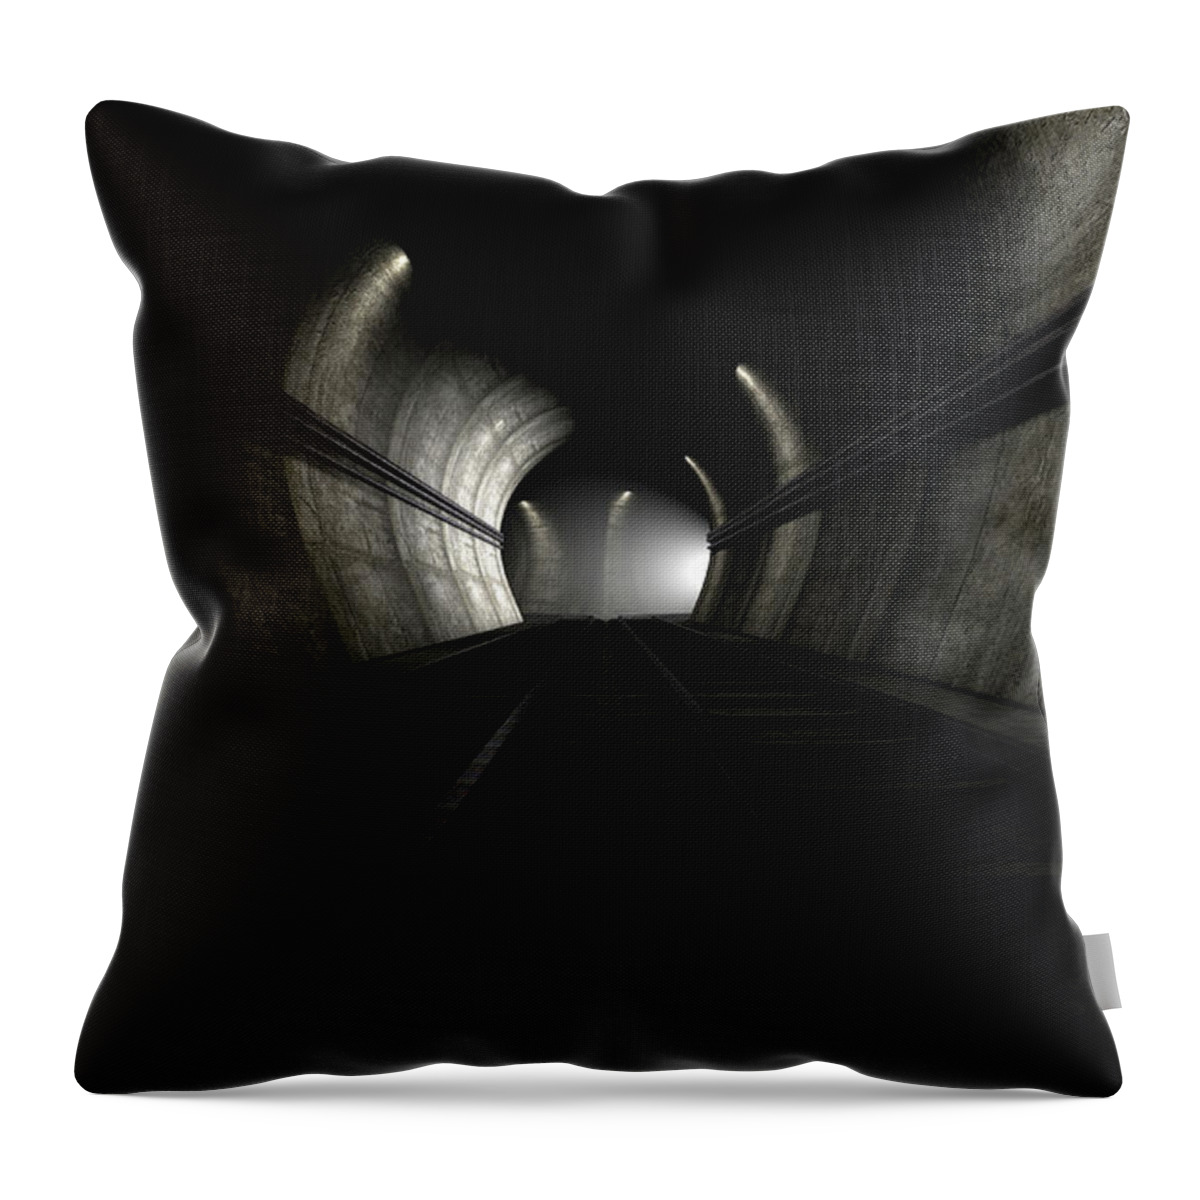 Tunnel Throw Pillow featuring the digital art Train Tracks And Approaching Train #1 by Allan Swart